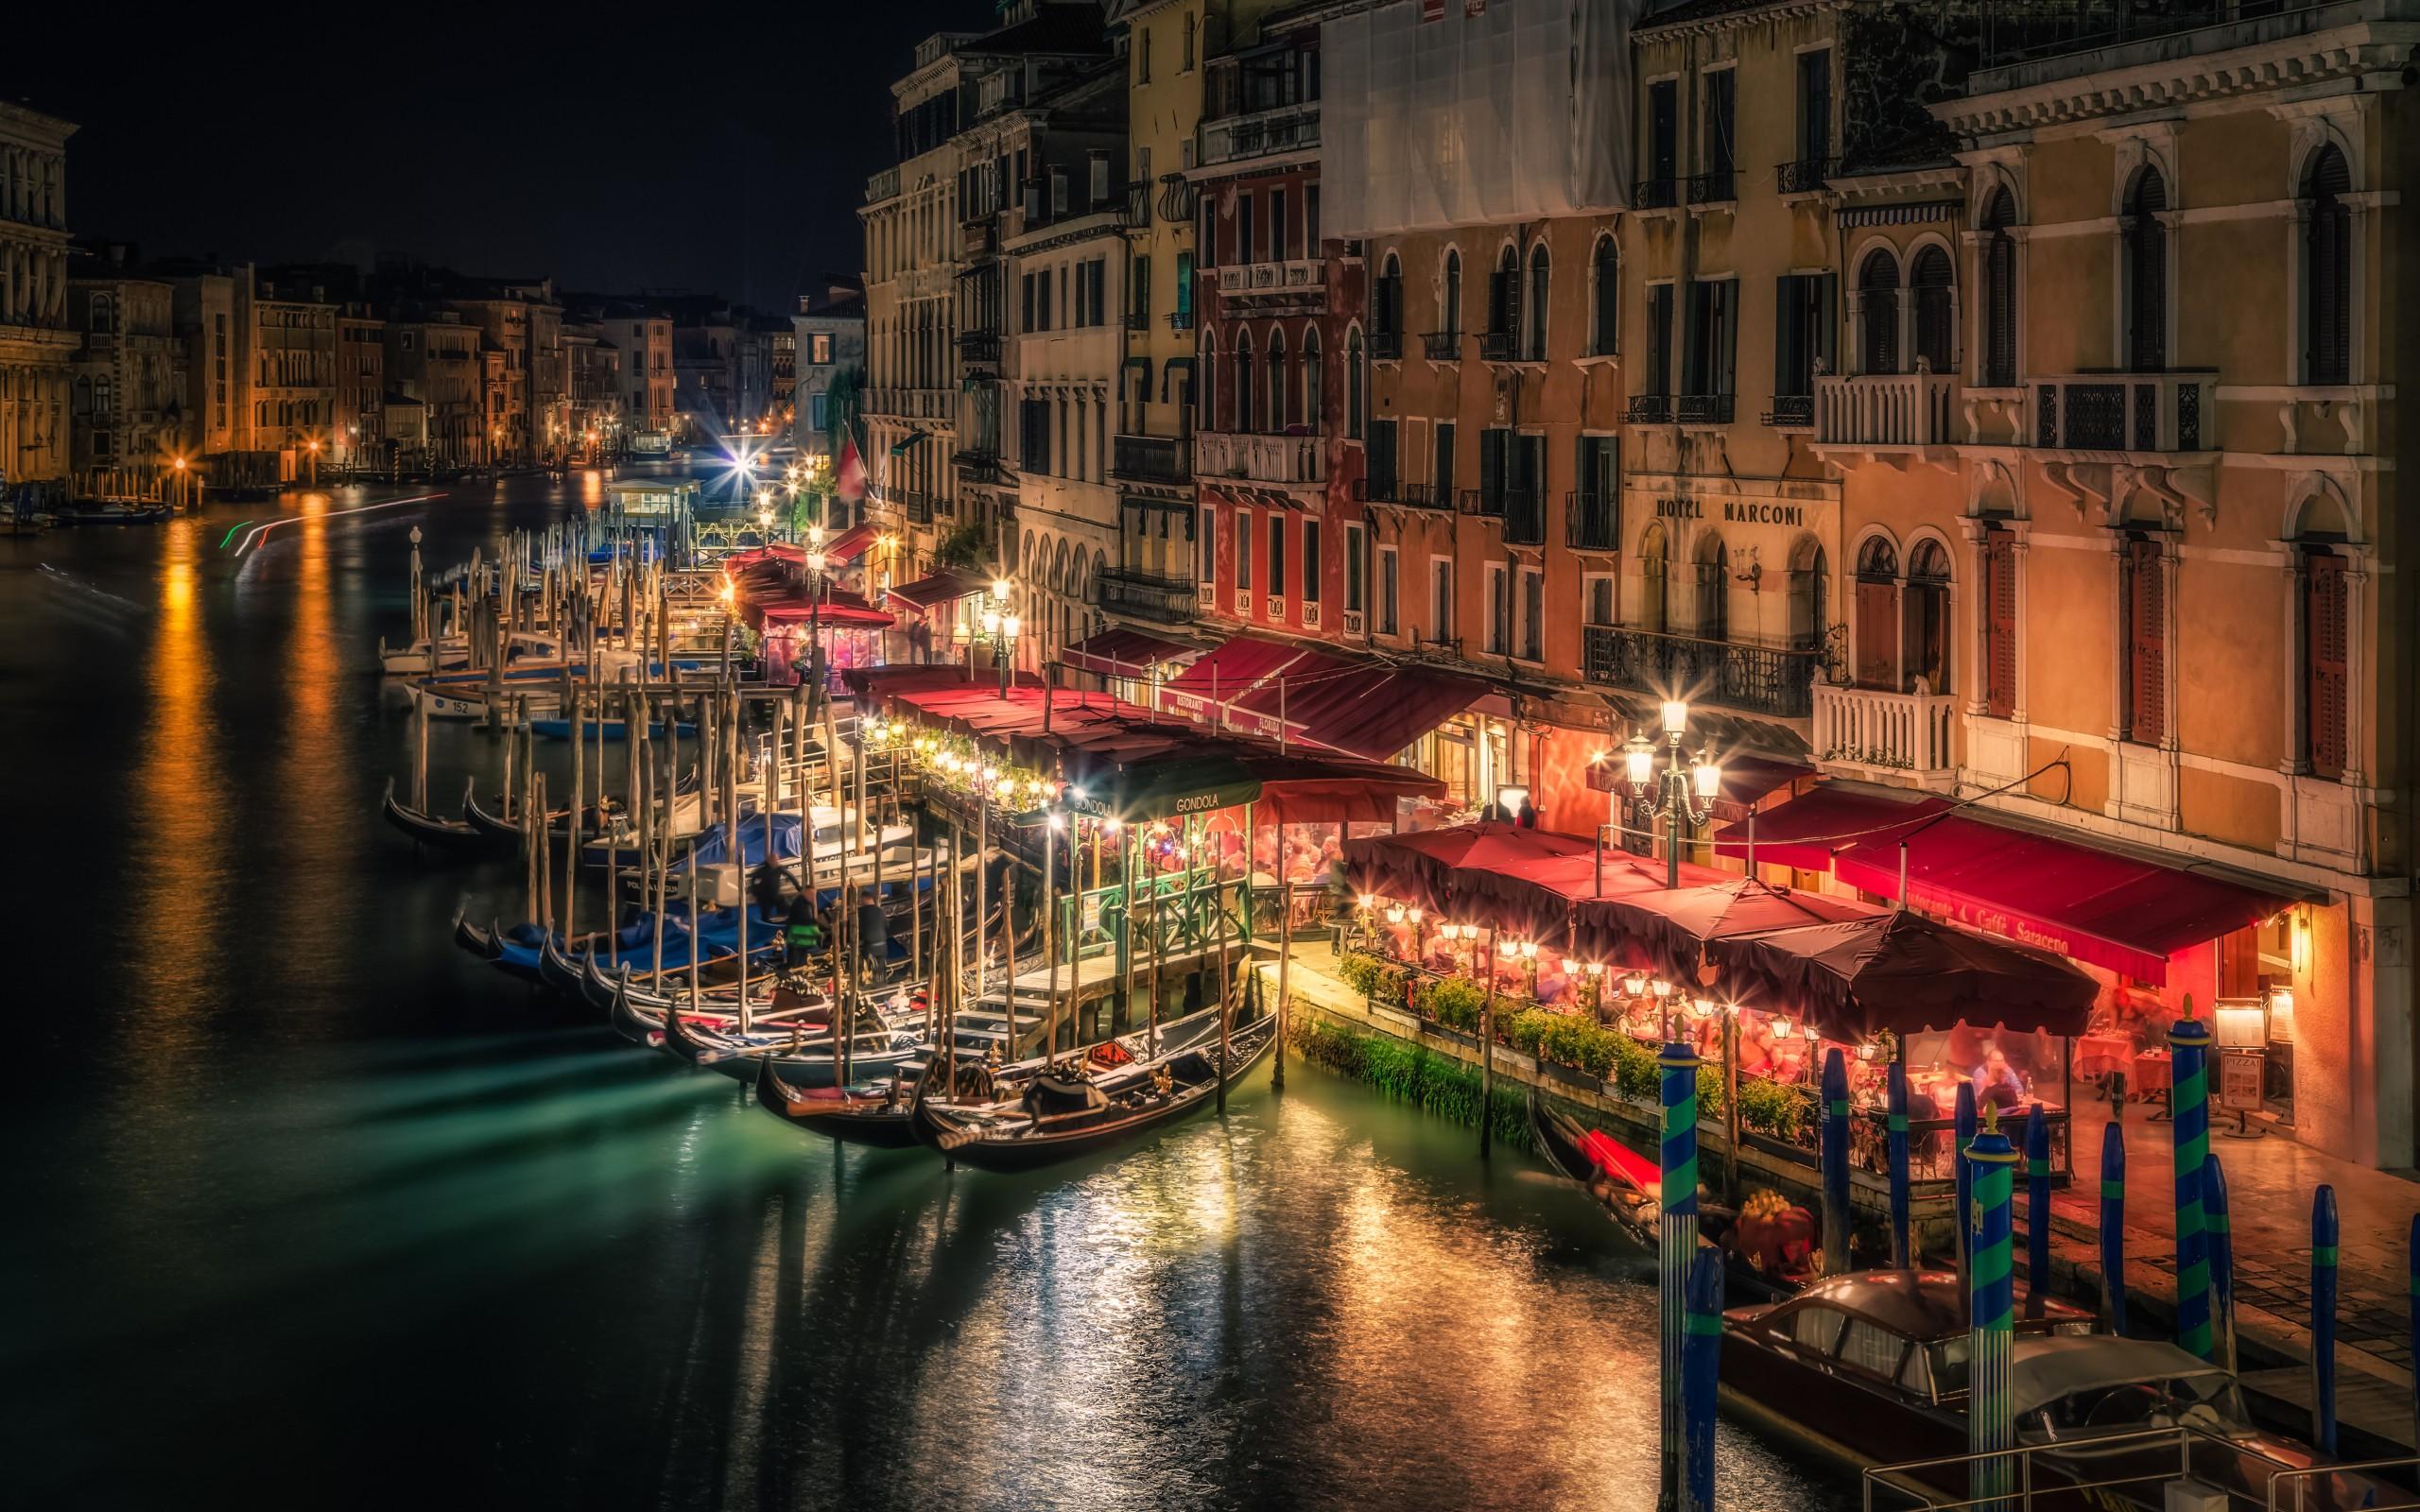 Grand Canal in Venice, Italy at Night HD Wallpaper. Background